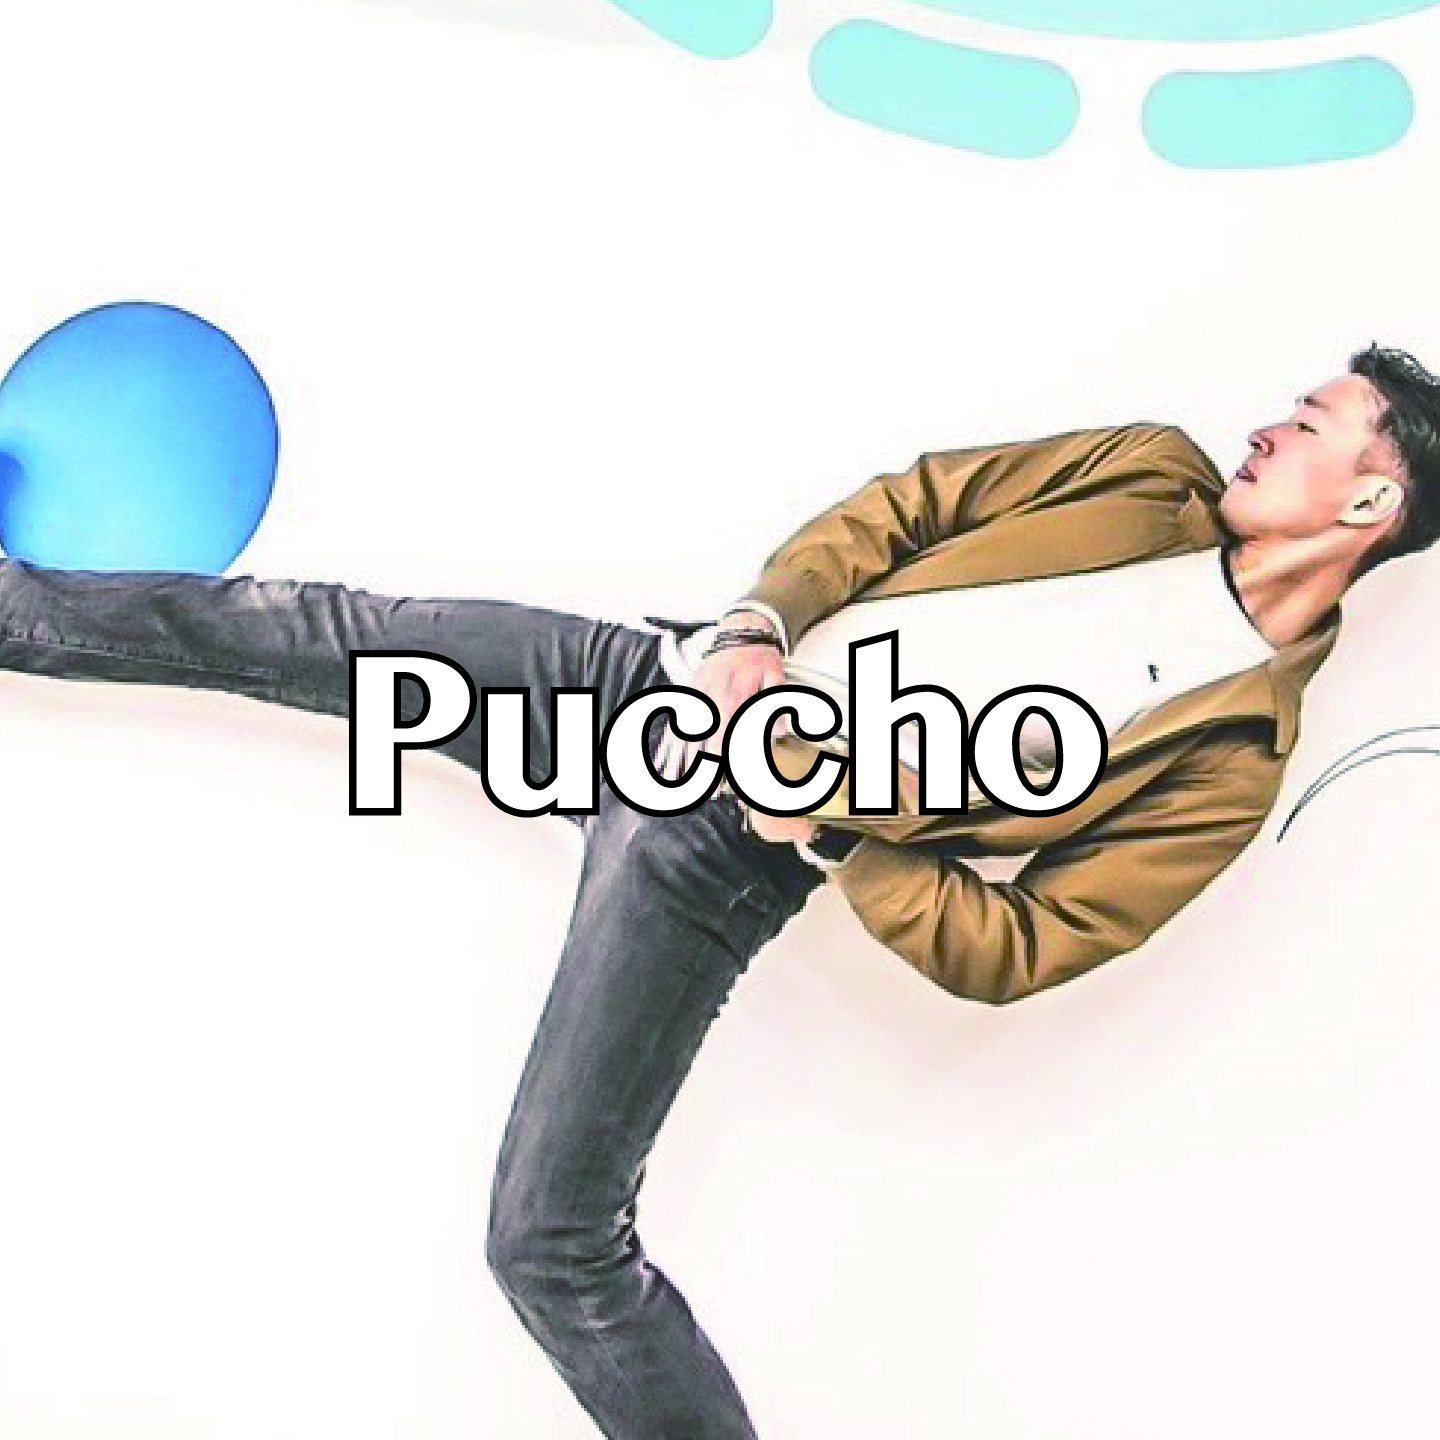 Puccho